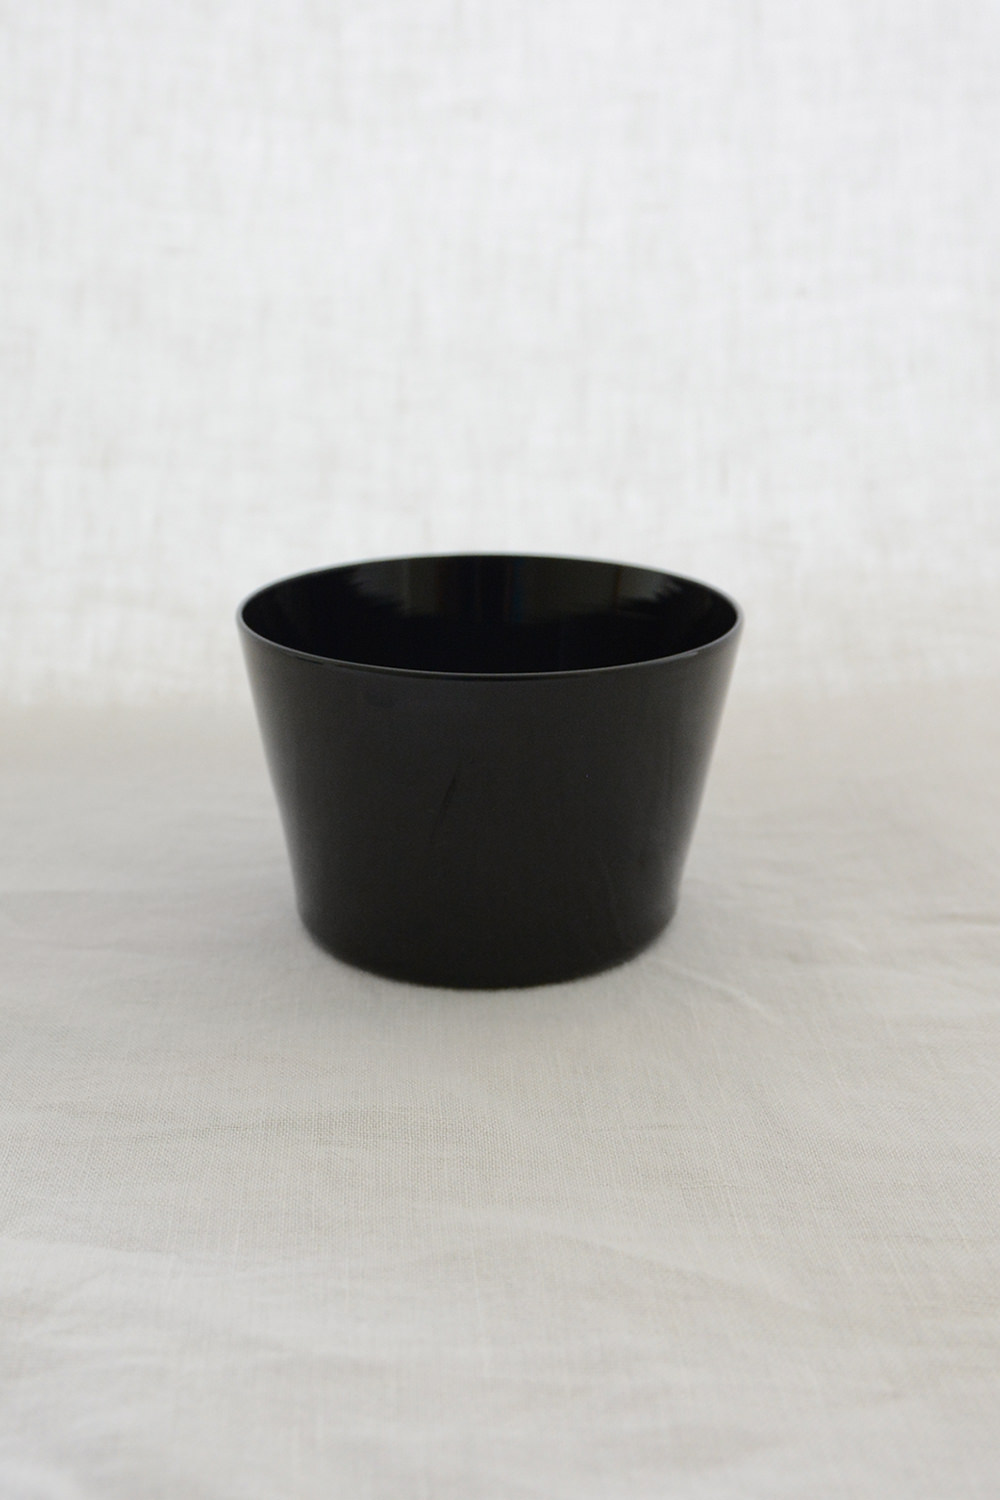 Yali murano glass black straight bowl top pictures